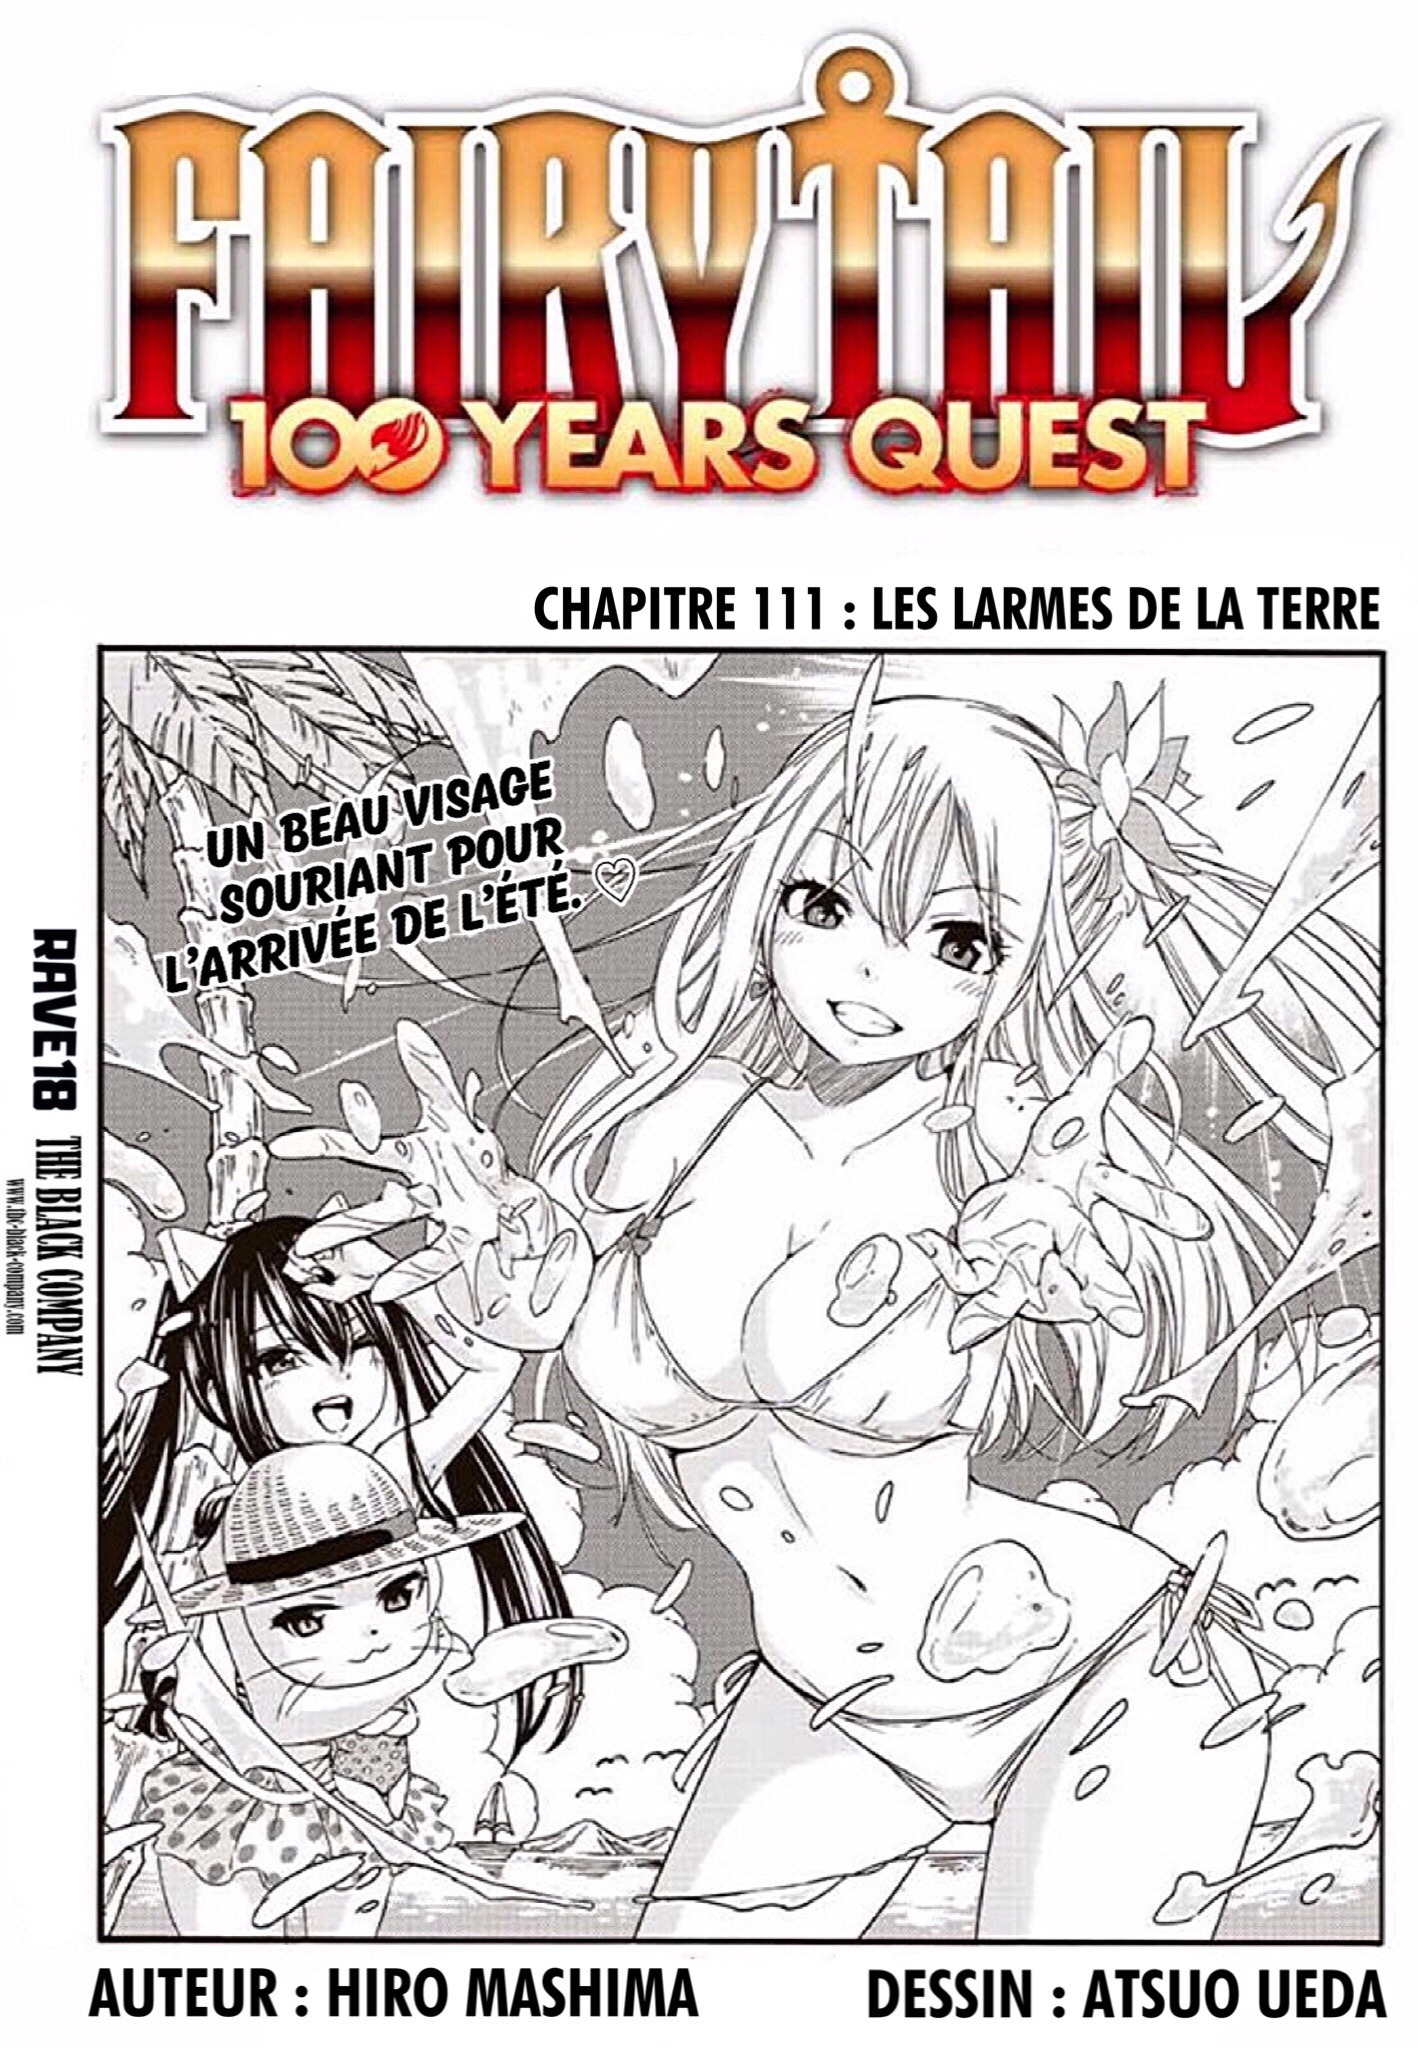 Fairy Tail 100 Years Quest: Chapter chapitre-111 - Page 1